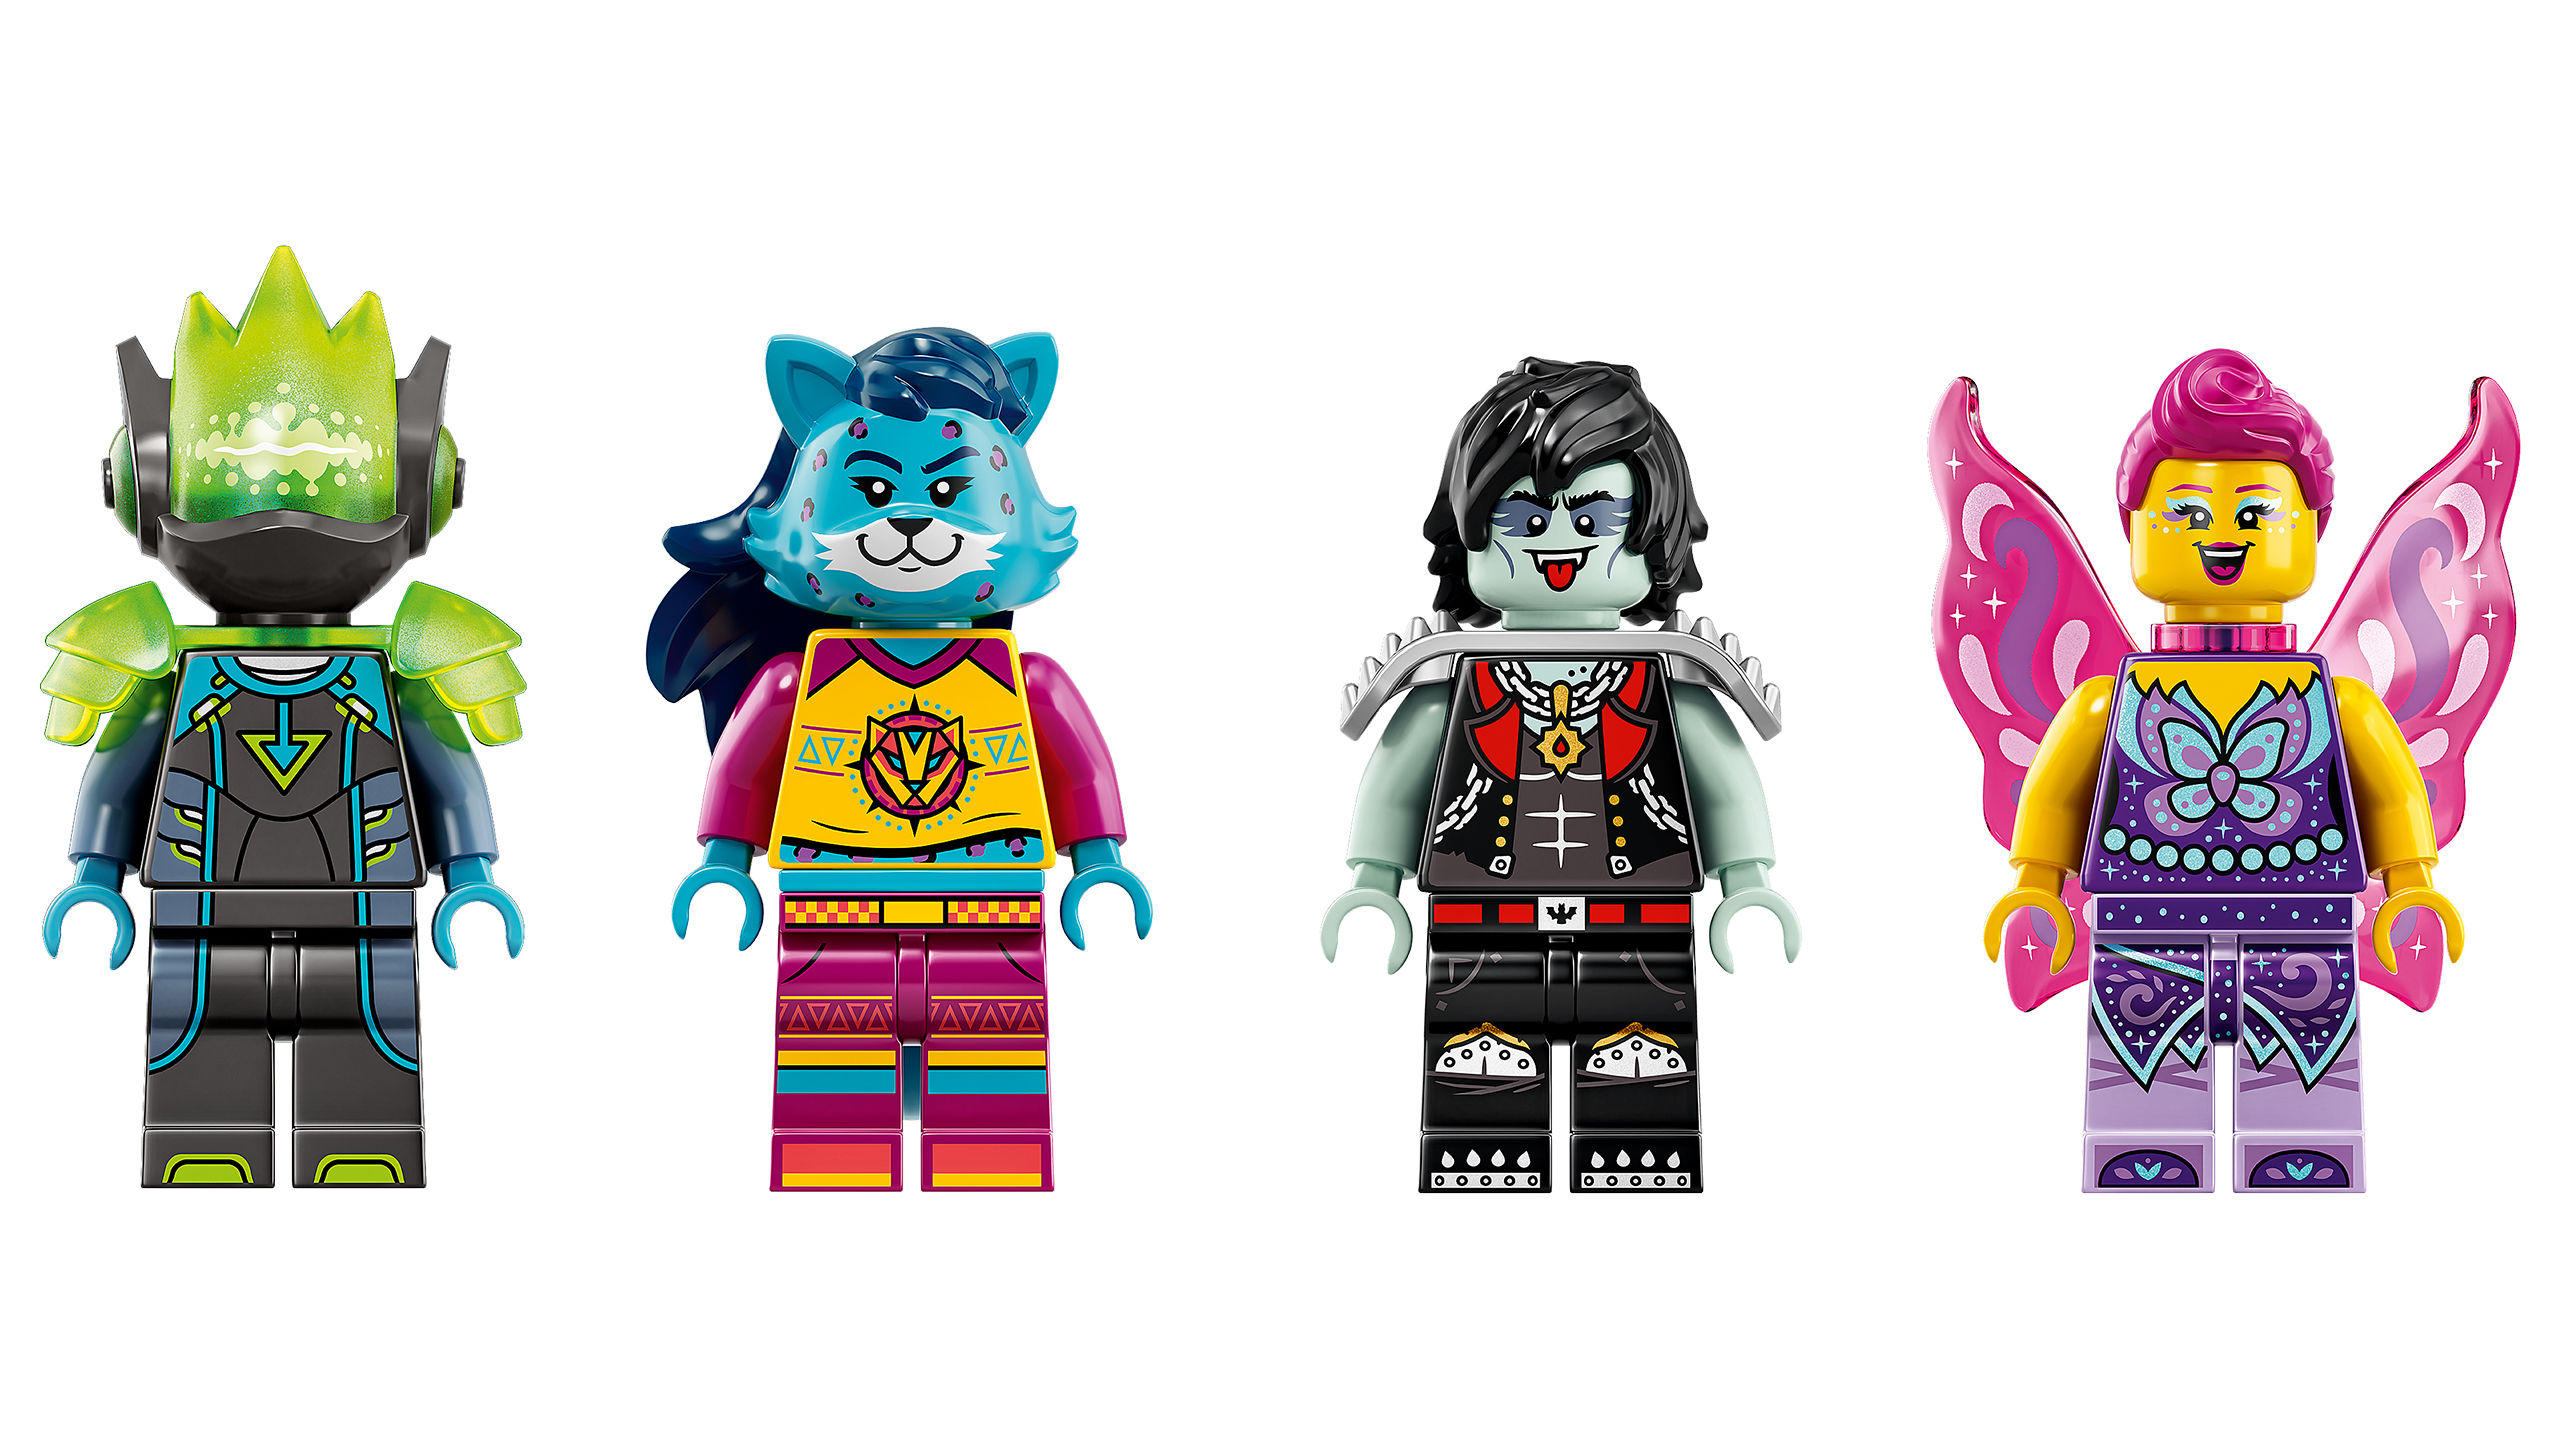 I'm going to pay $US100 ($128) for a single fairy minifigure, I just know it. (Photo: The Lego Group)